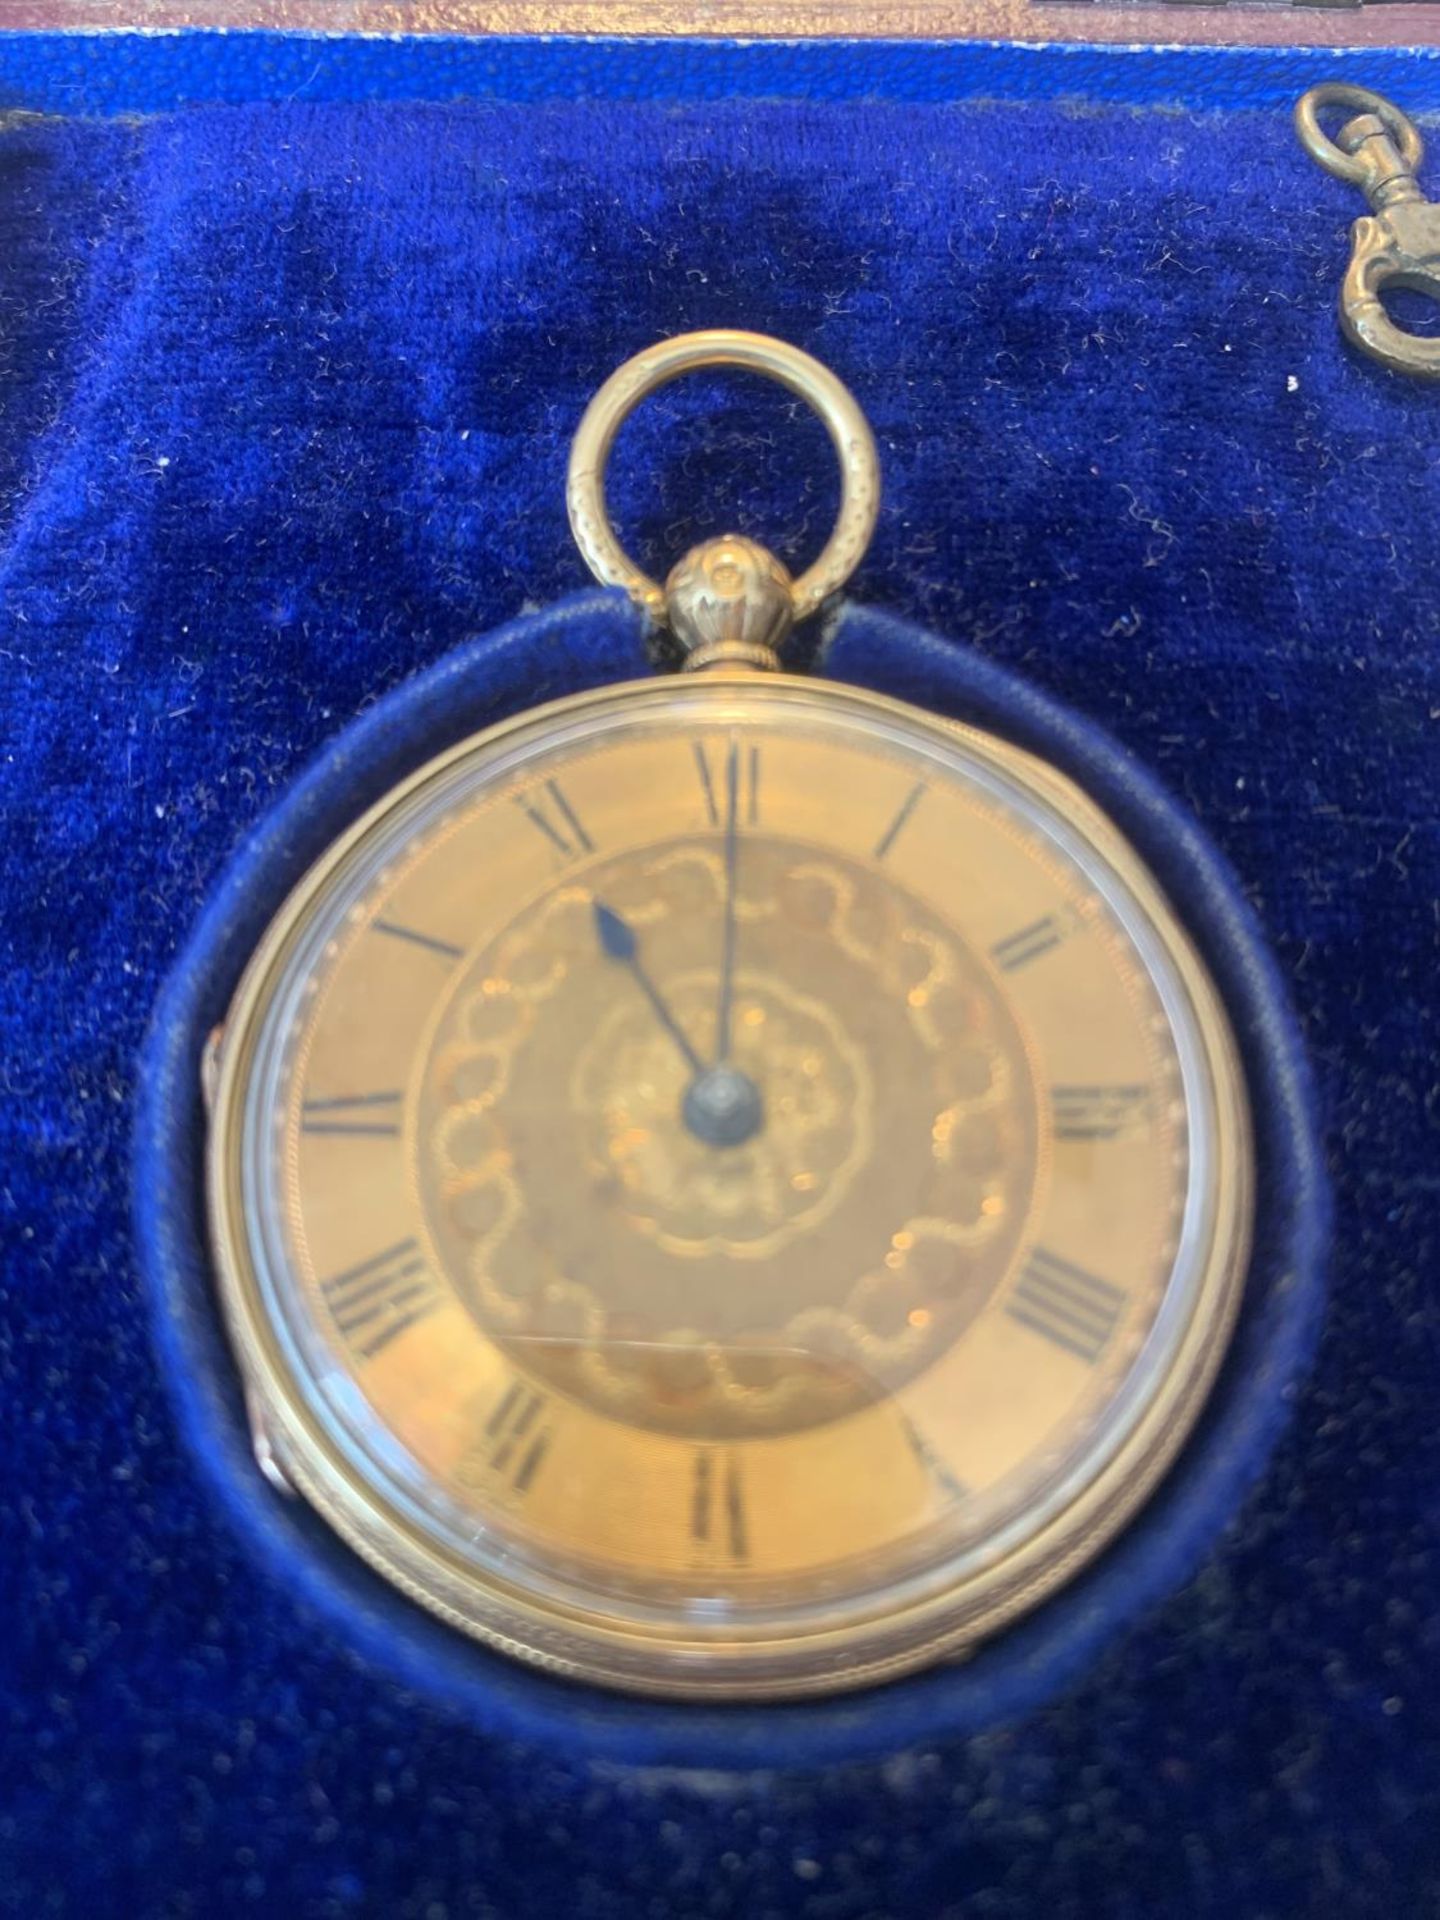 A VINTAGE 18 CARAT GOLD POCKET WATCH WITH DECORATIVE FACE AND ROMAN NUMERALS, KEY AND ORIGINAL BOX - Image 2 of 5